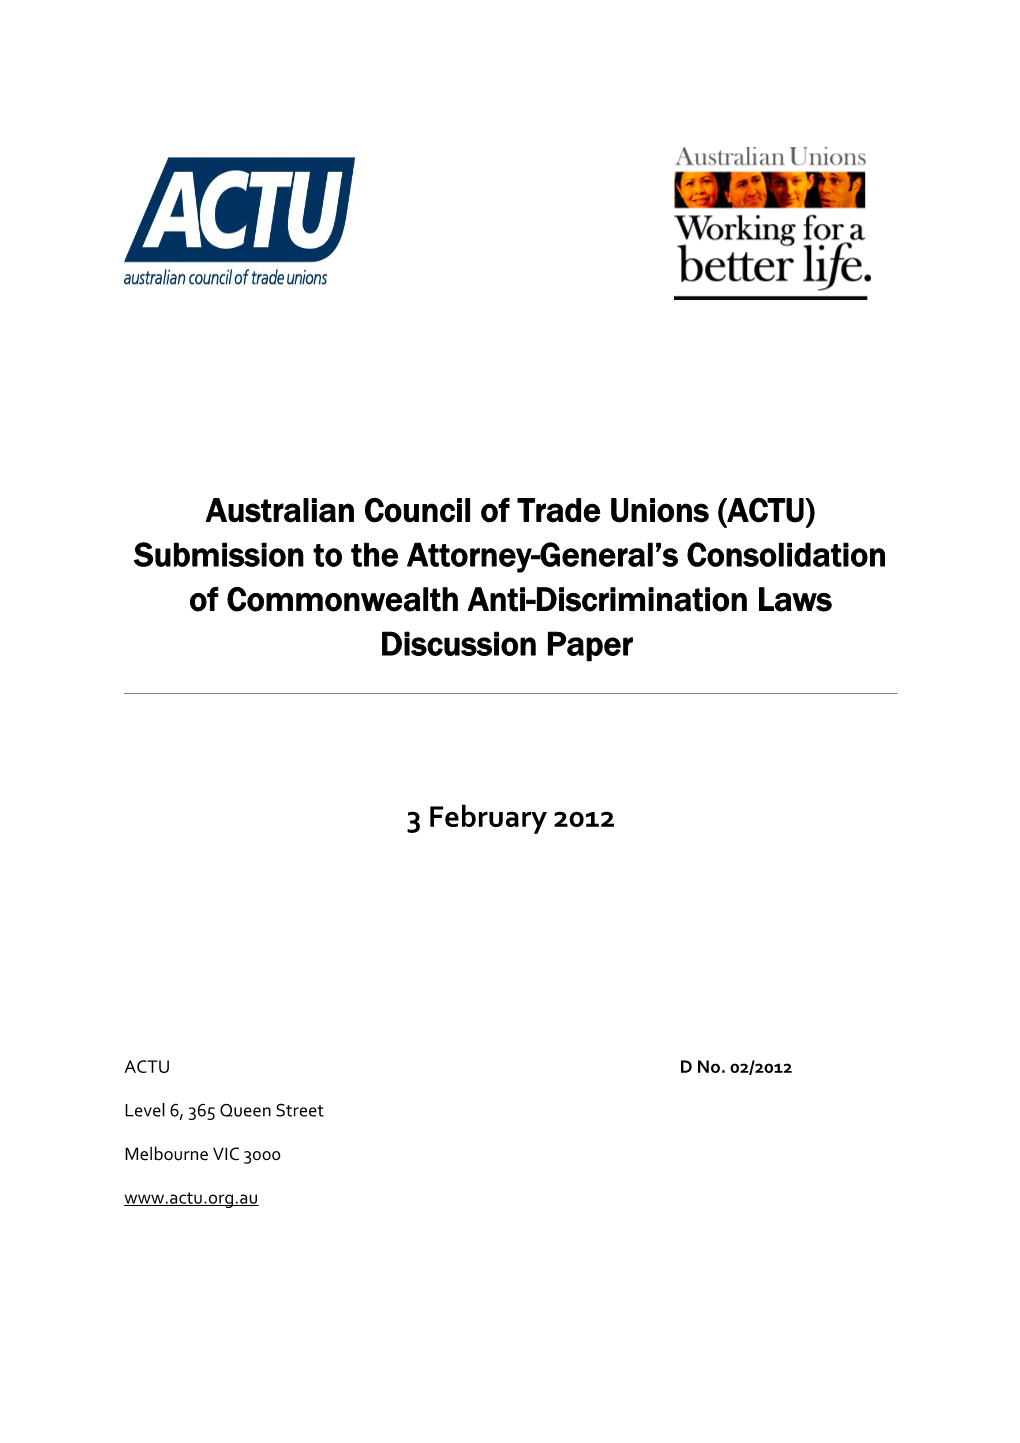 Submission on the Consolidation of Commonwealth Anti-Discrimination Laws - Australian Council